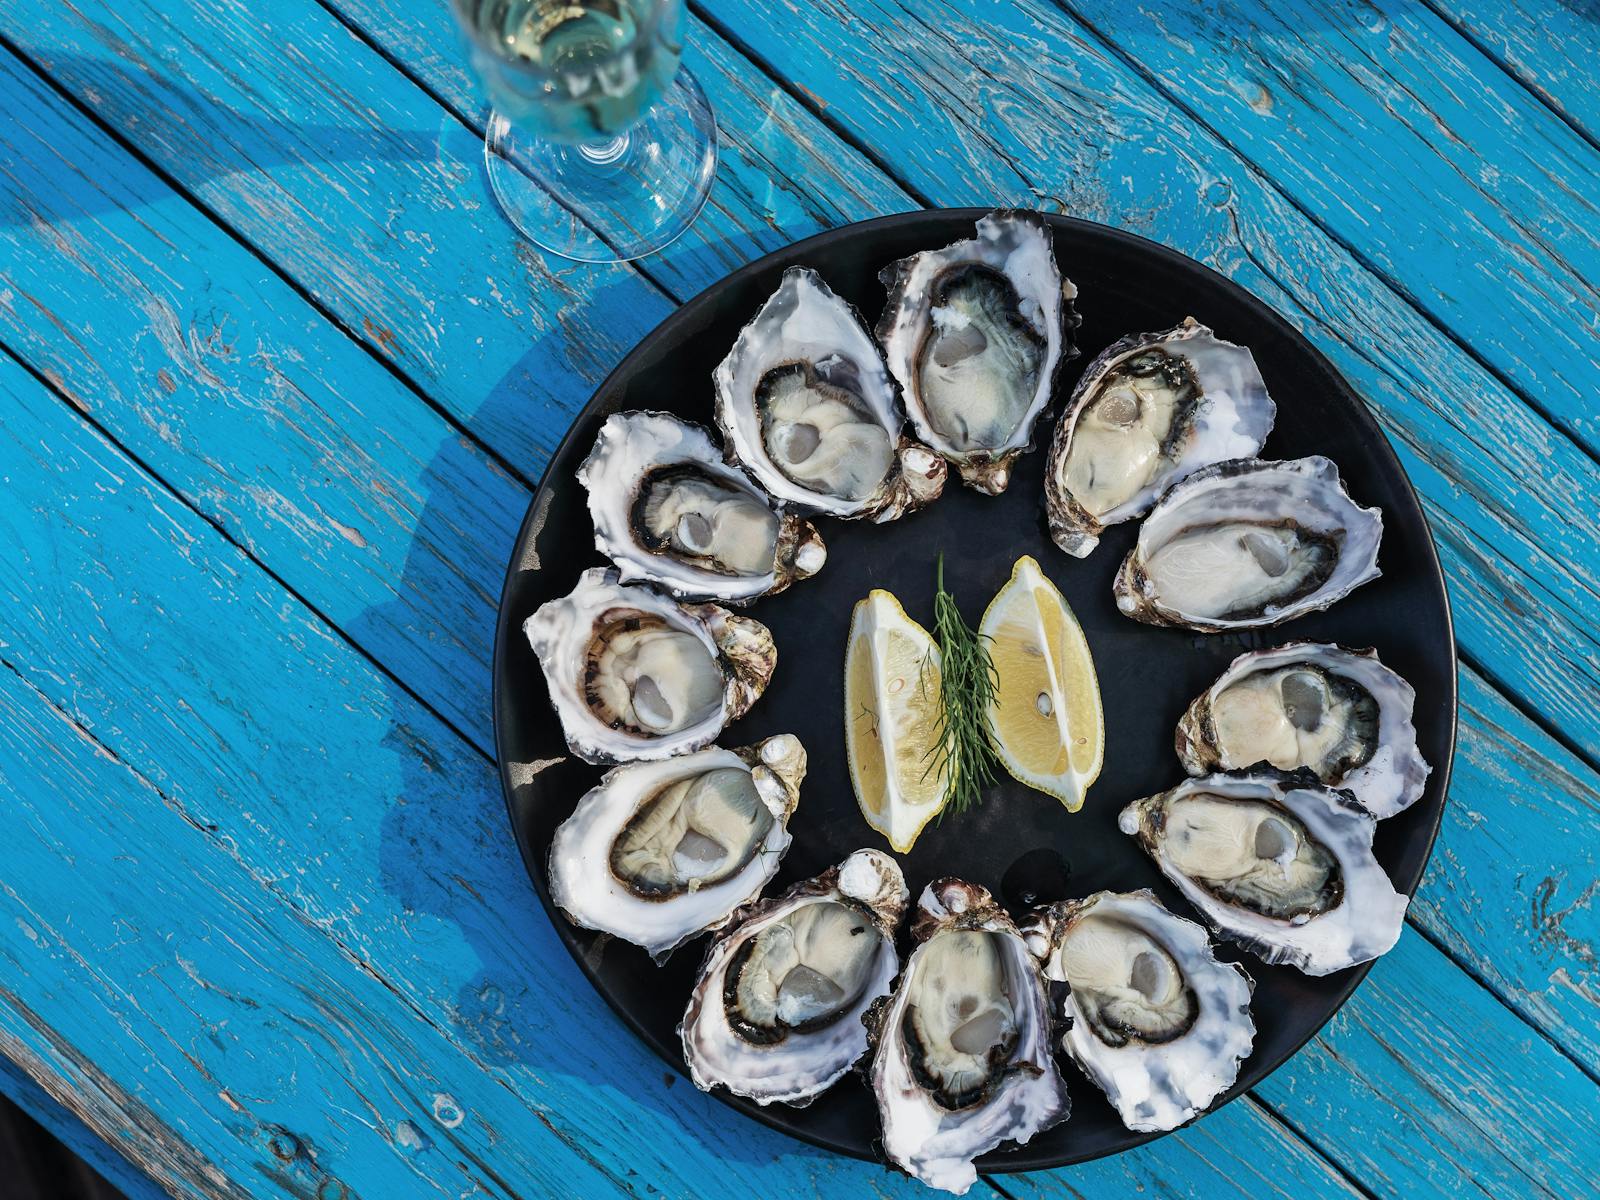 Feast on fresh Get Shucked oysters when you discover Bruny Island with Adventure Trails Tasmania